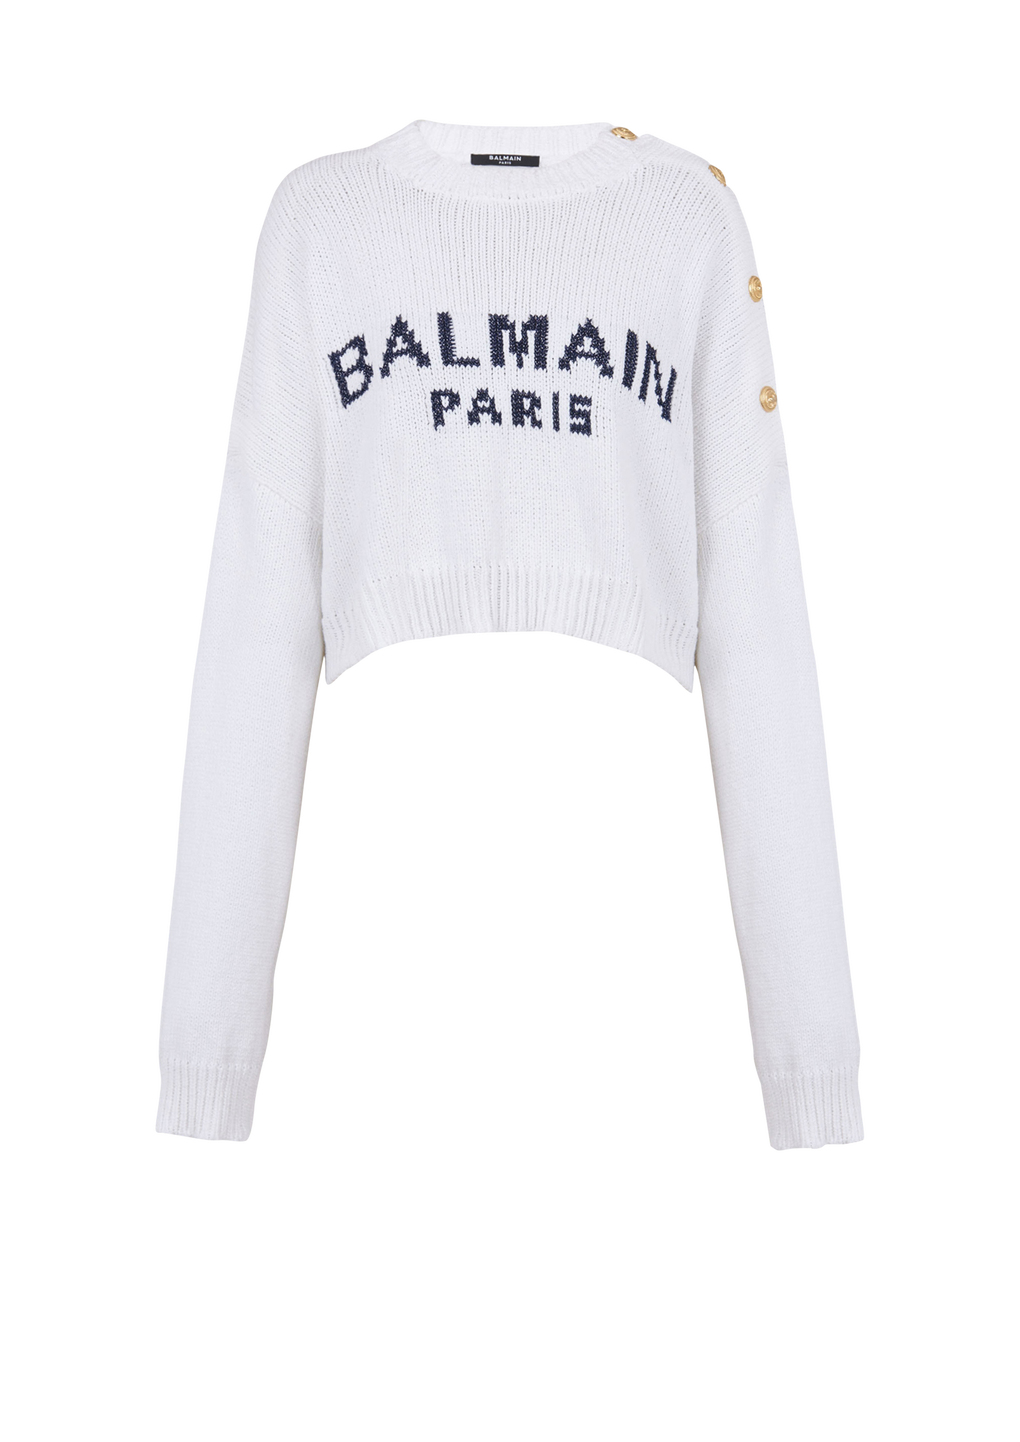 HIGH SUMMER CAPSULE - Cropped knit sweater with Balmain logo print, white, hi-res